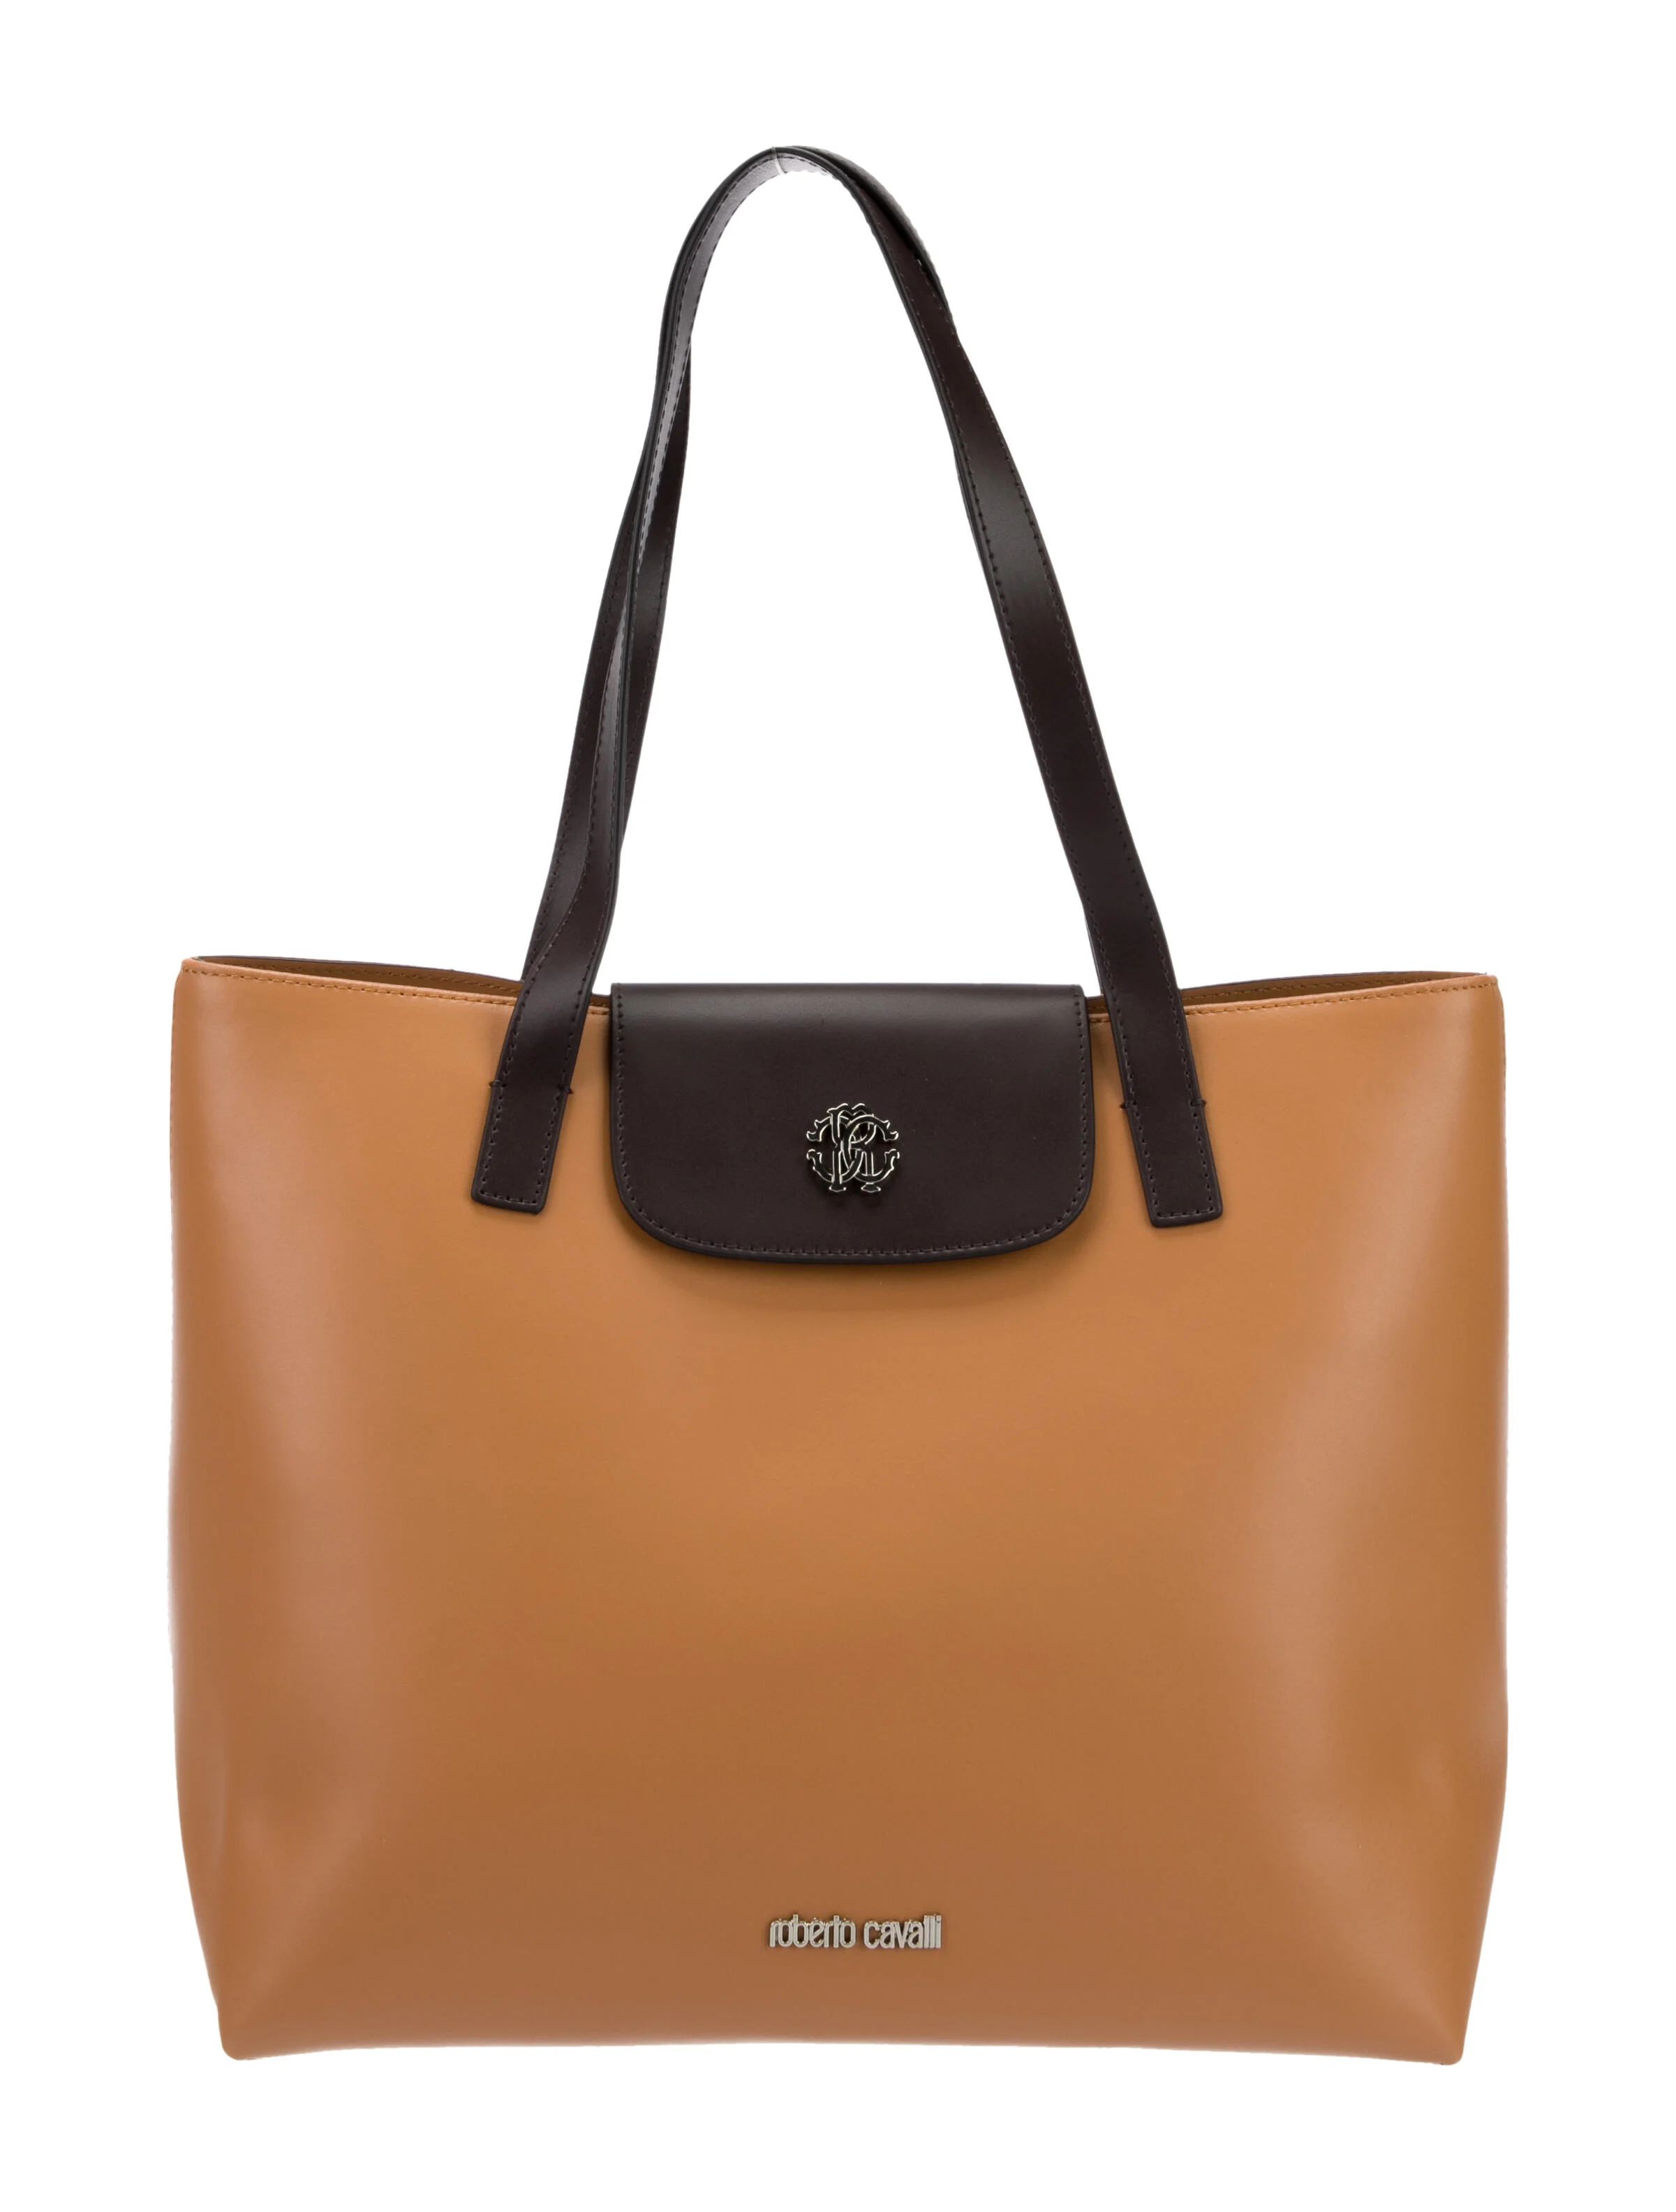 Two Toned Leather Tote Bag | The RealReal